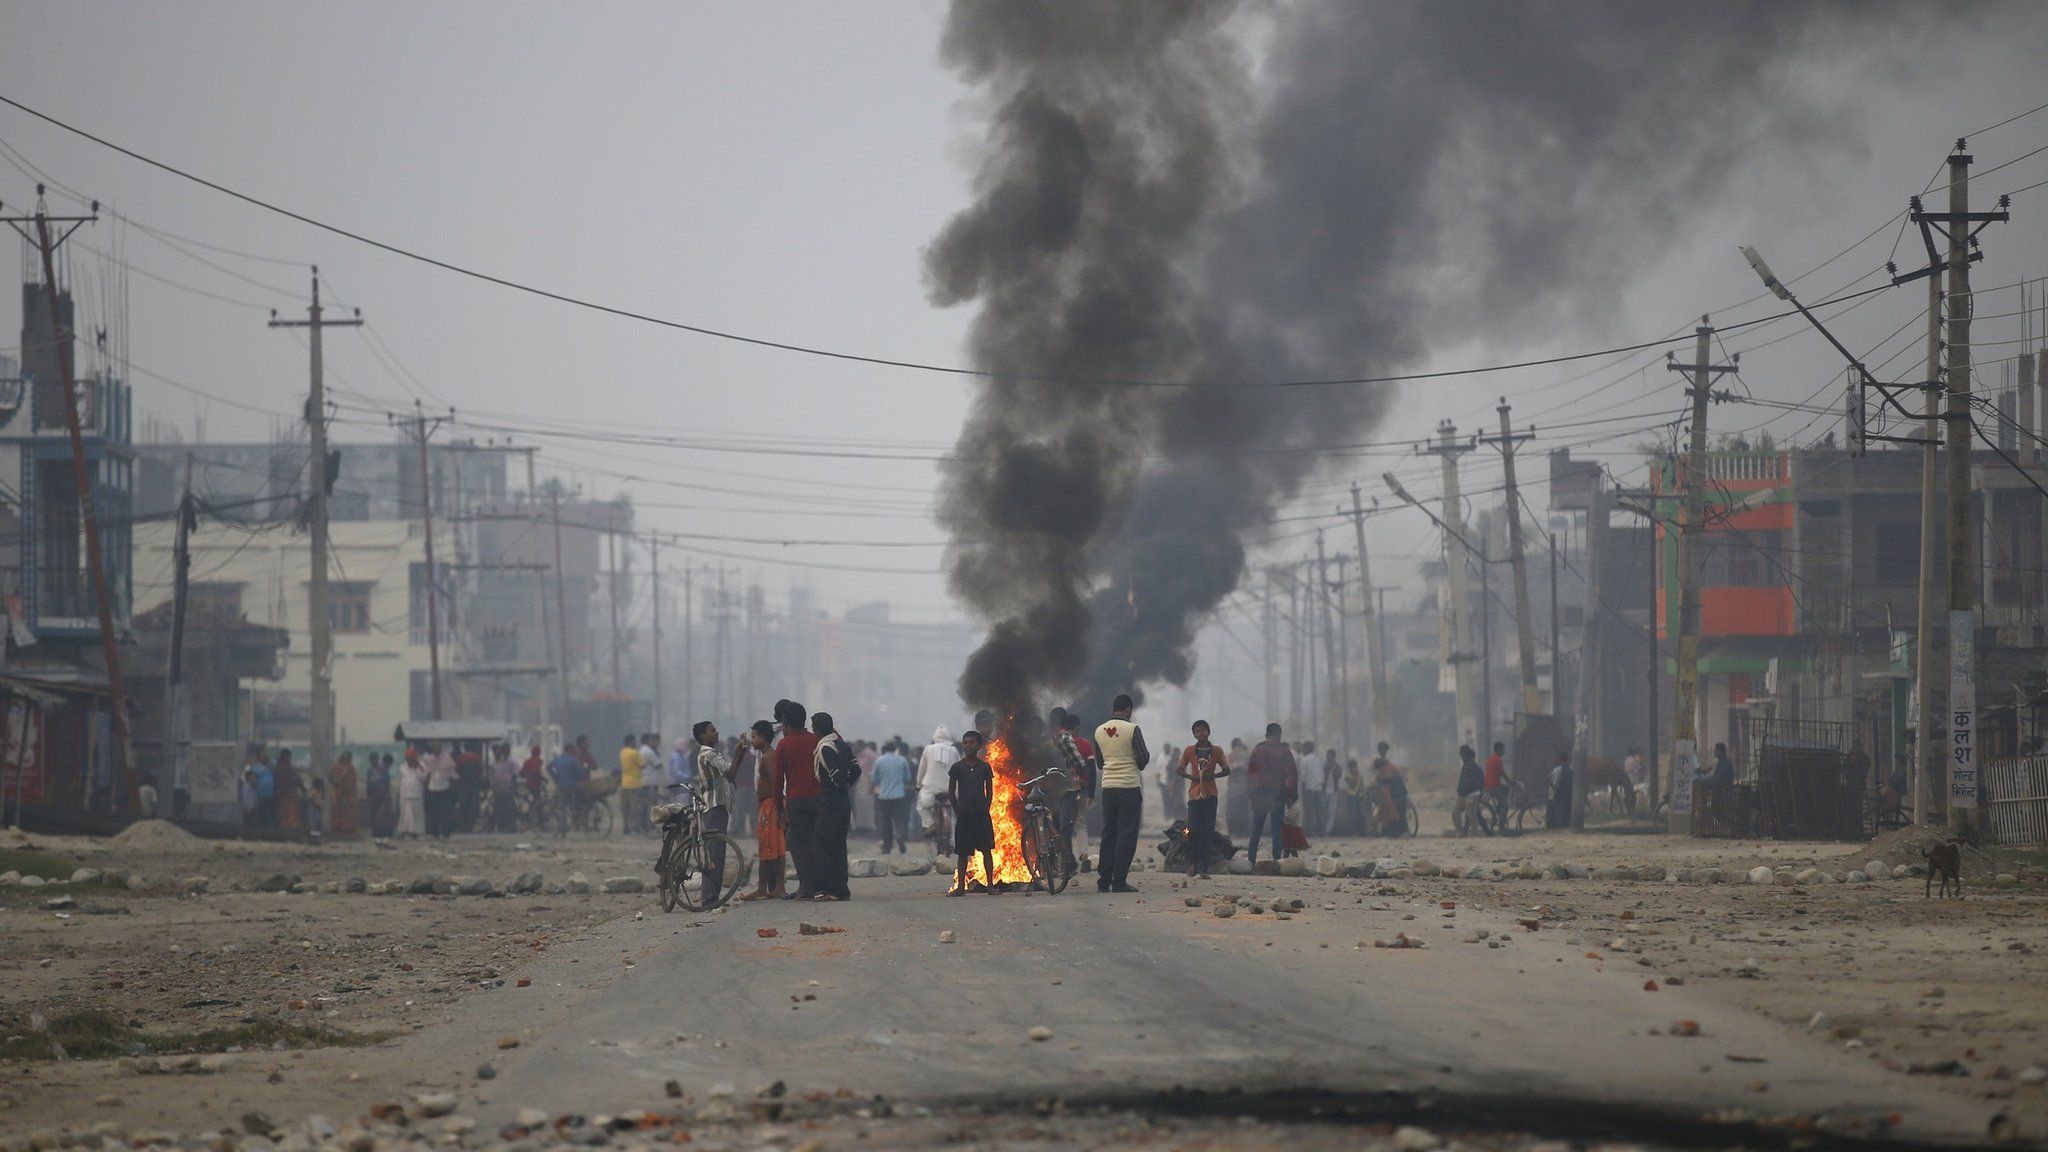 Protesters stand near burning tyres as they gather to block the highway connecting Nepal and India during a general strike called by Madhesi protesters earlier in November